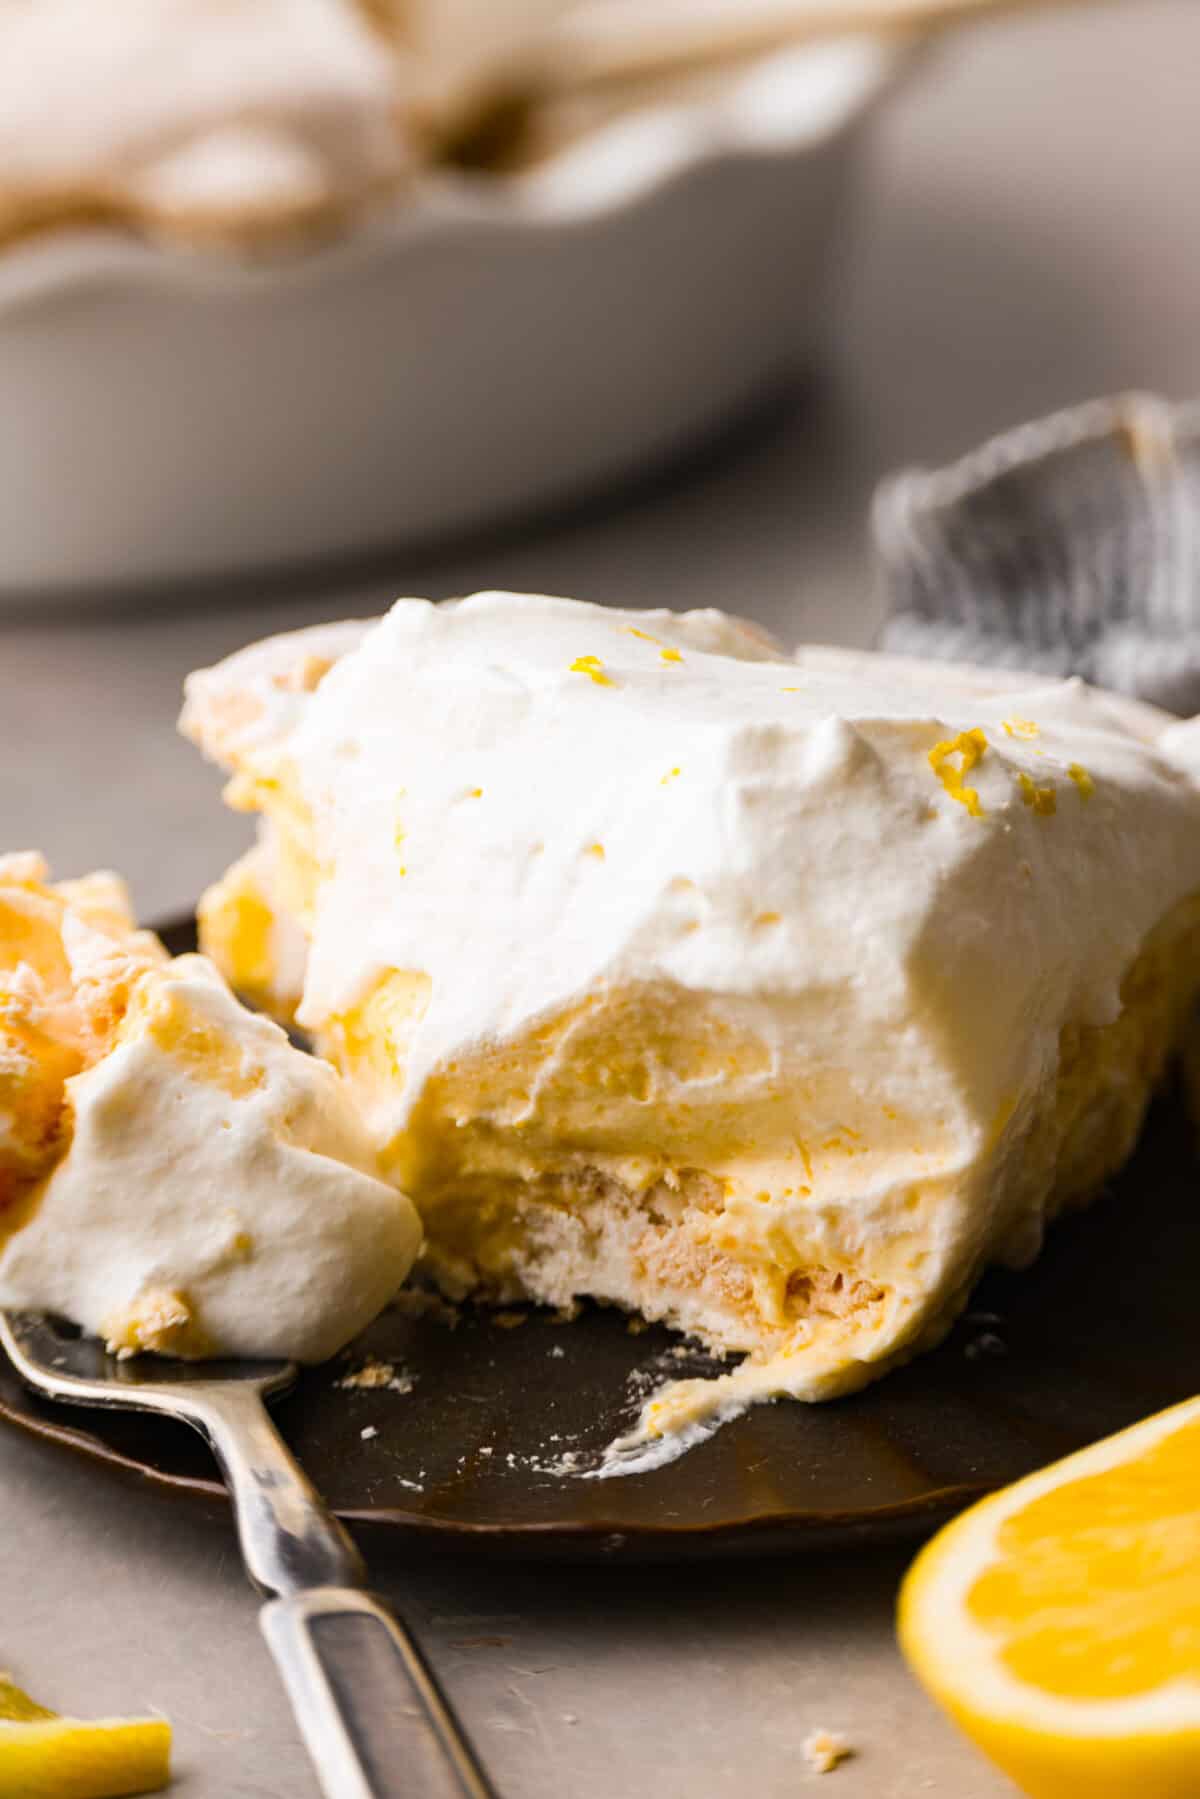 Close view of a slice of lemon pie on a plate with a fork.